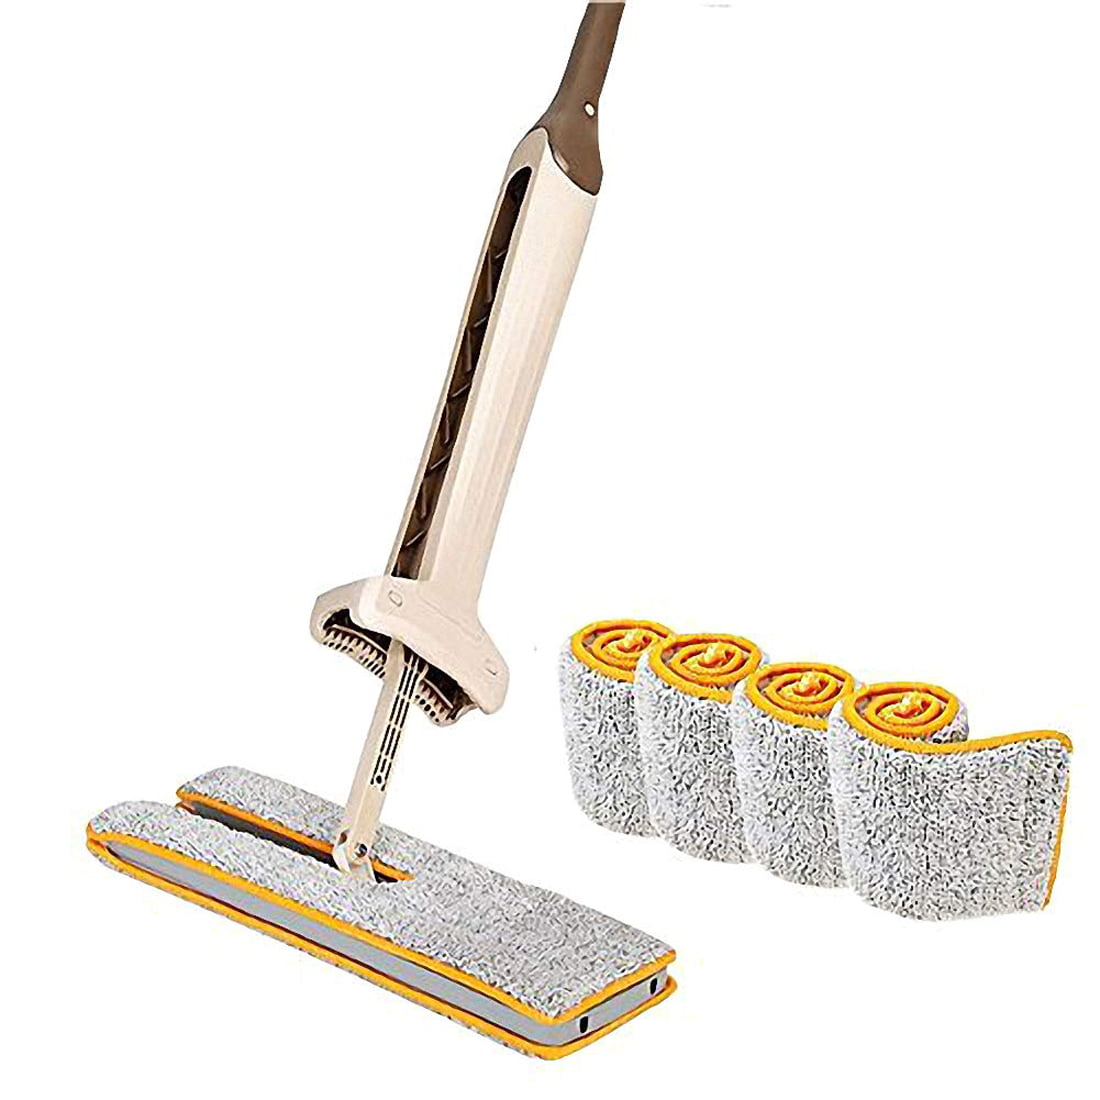 Self-Wringing Double Sided Flat Mop Telescopic Handle Mop Floor Cleaning HOT 